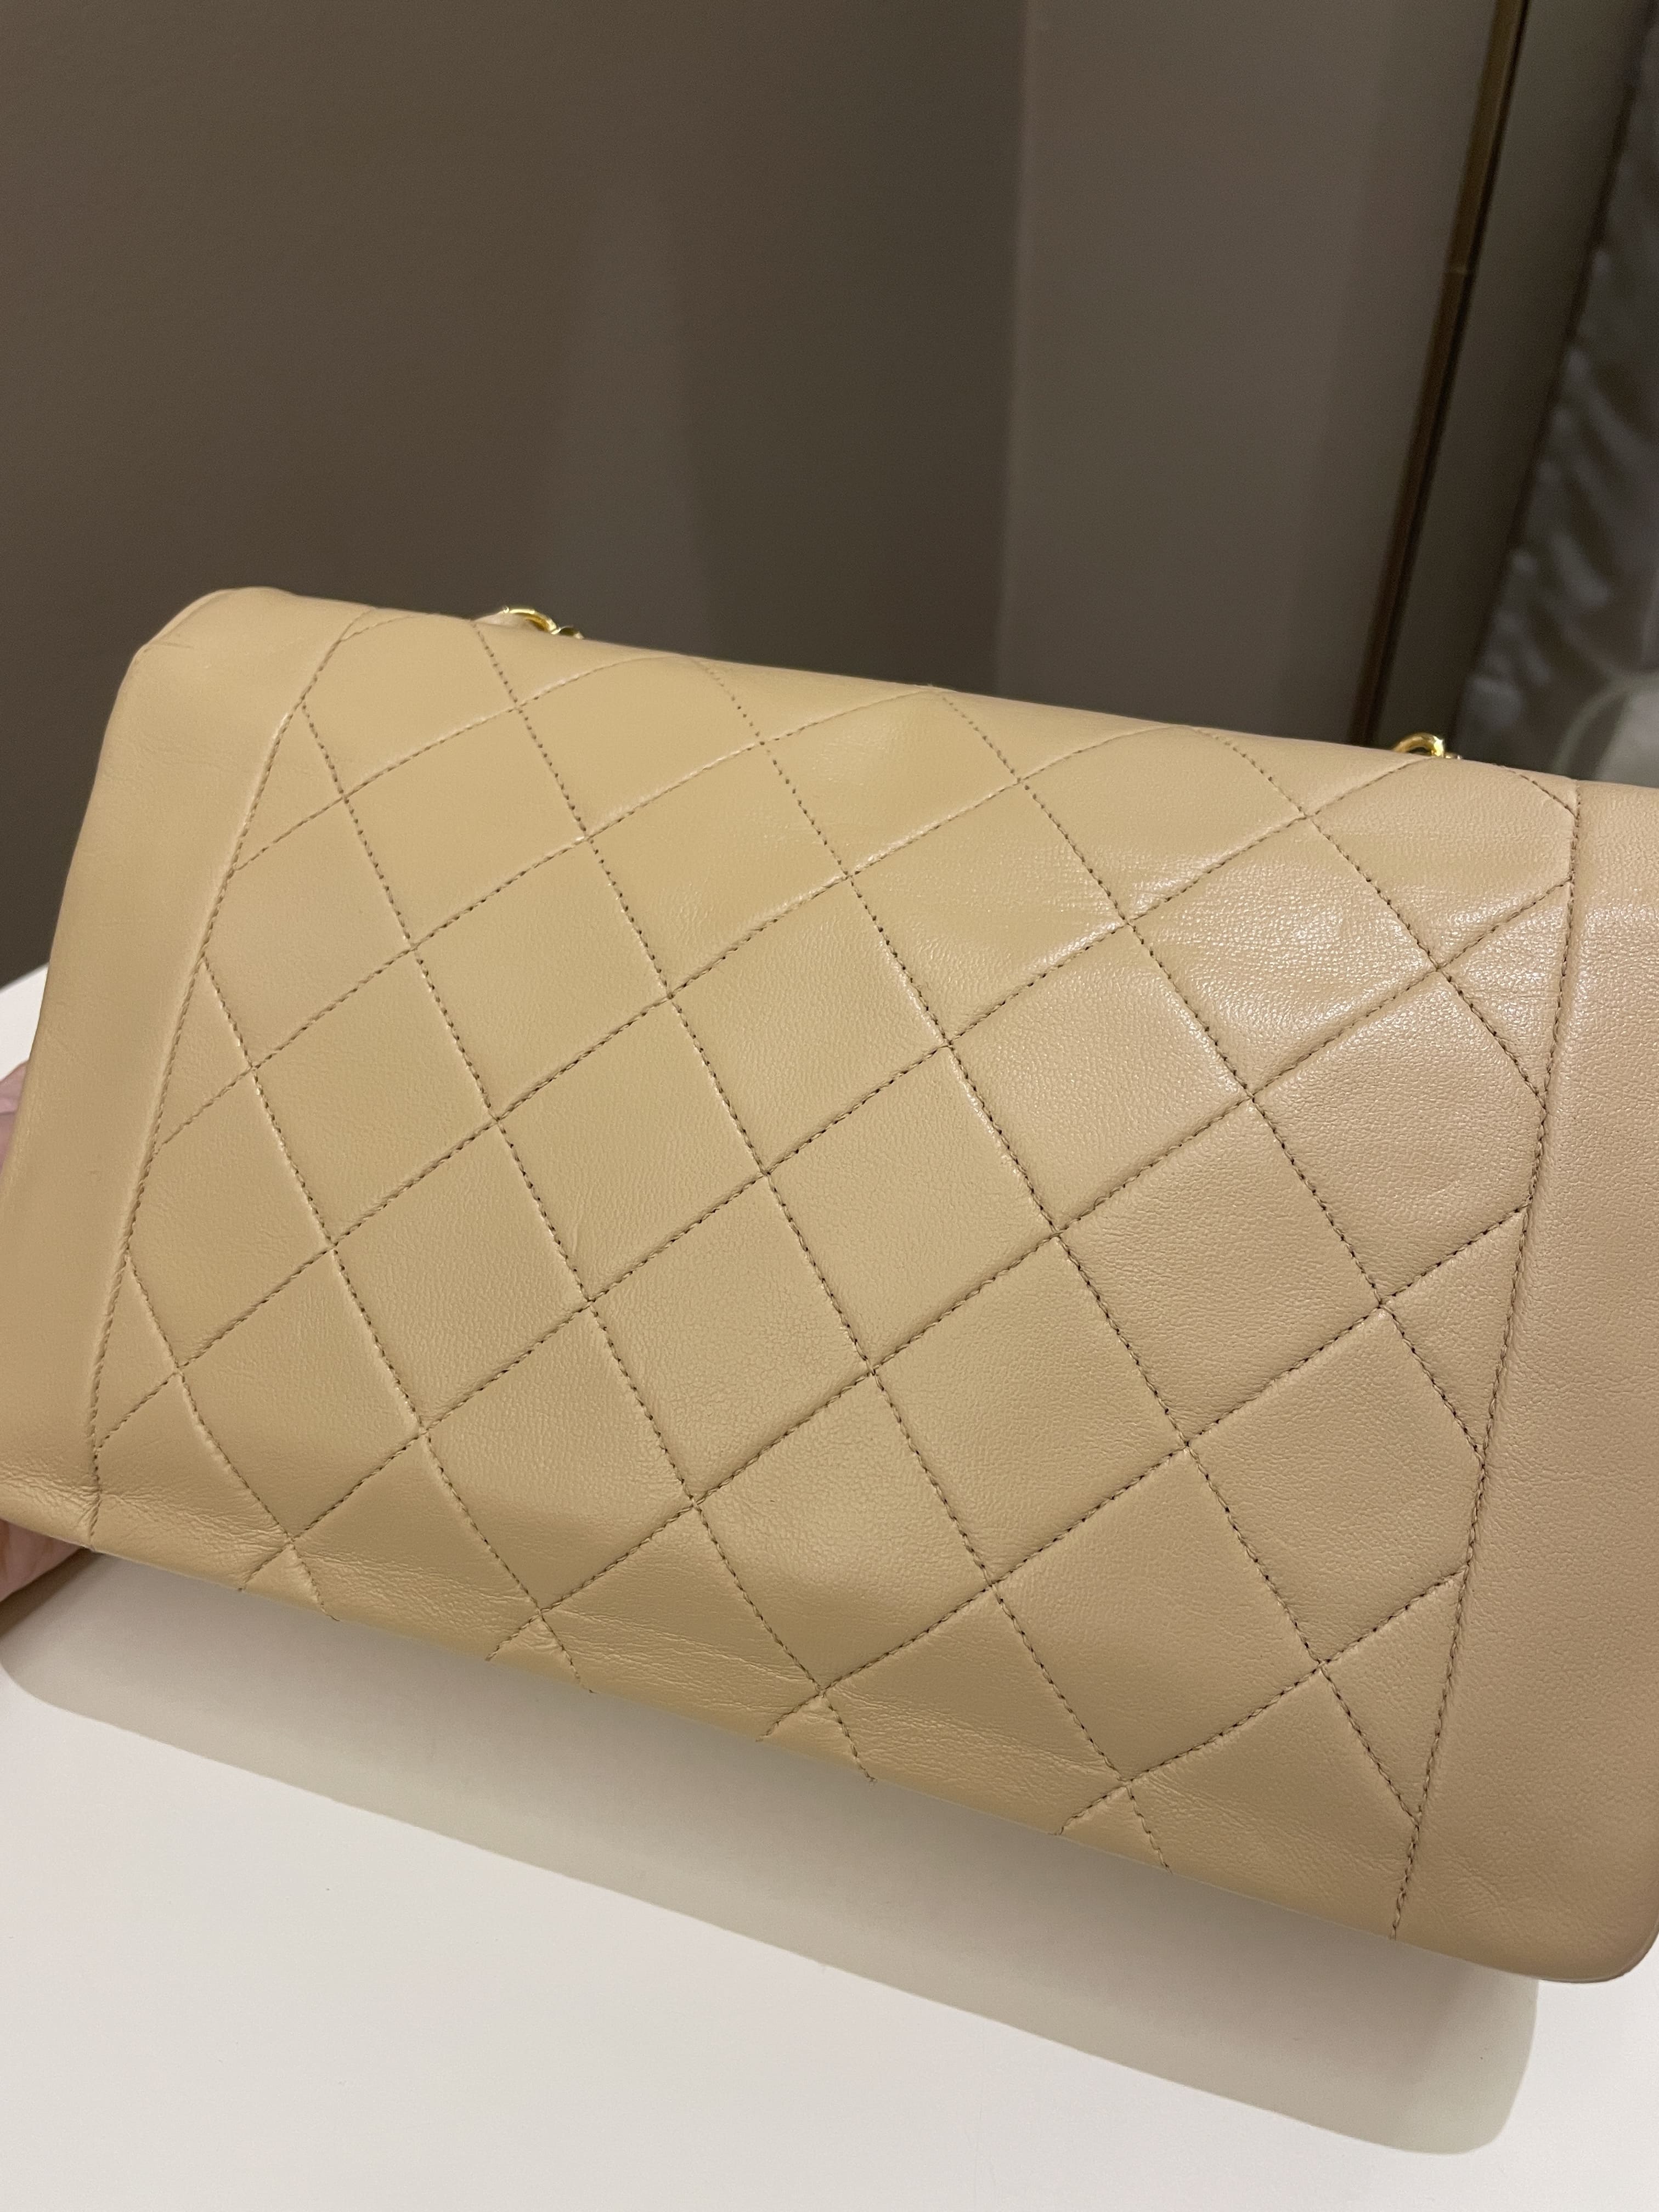 Chanel Vintage Quilted Diana Flap Bag Beige Lambskin